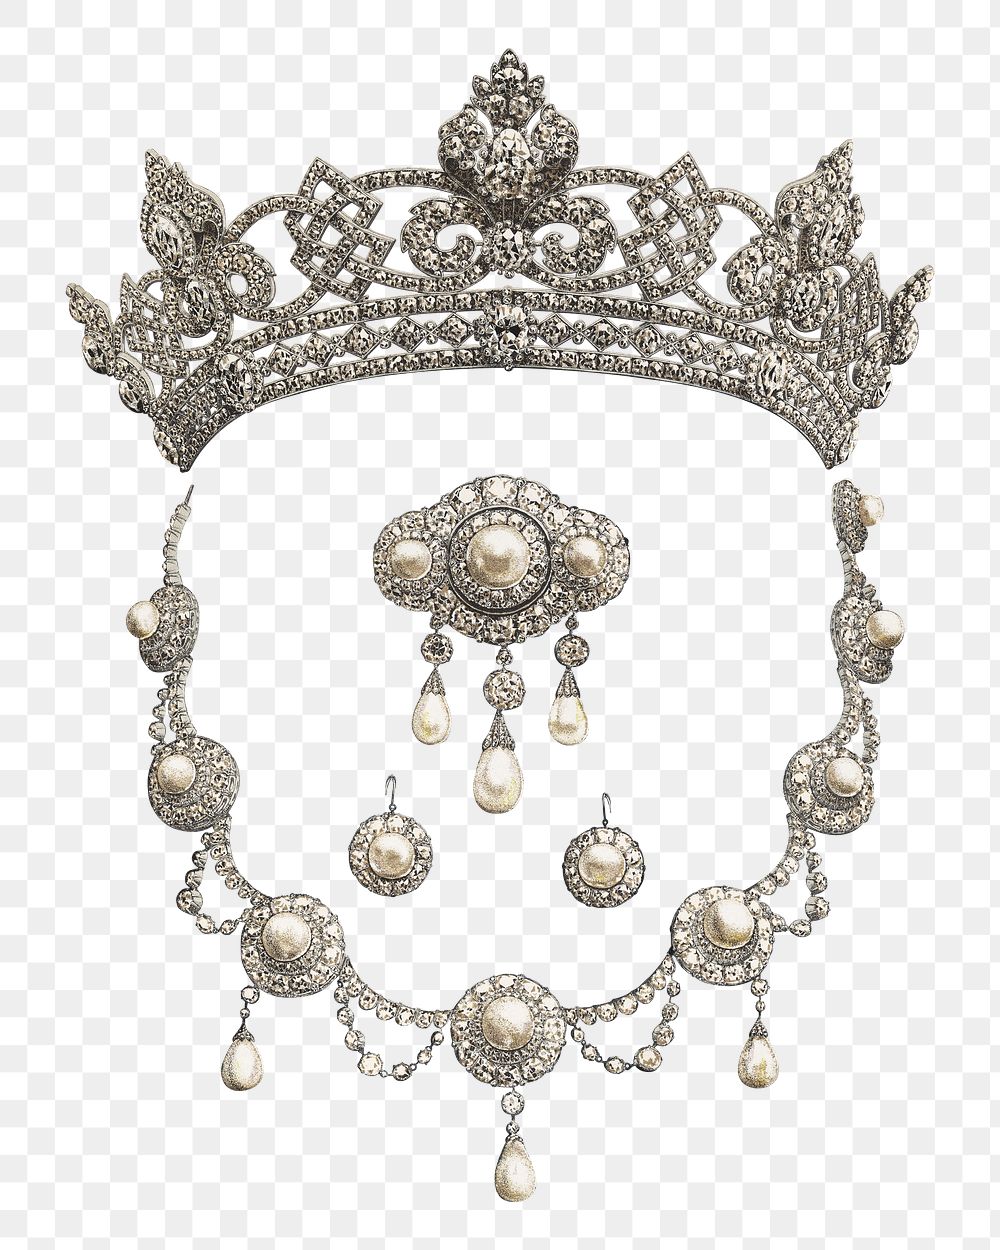 Vintage crown png jewelry illustration on transparent background. Remixed by rawpixel.